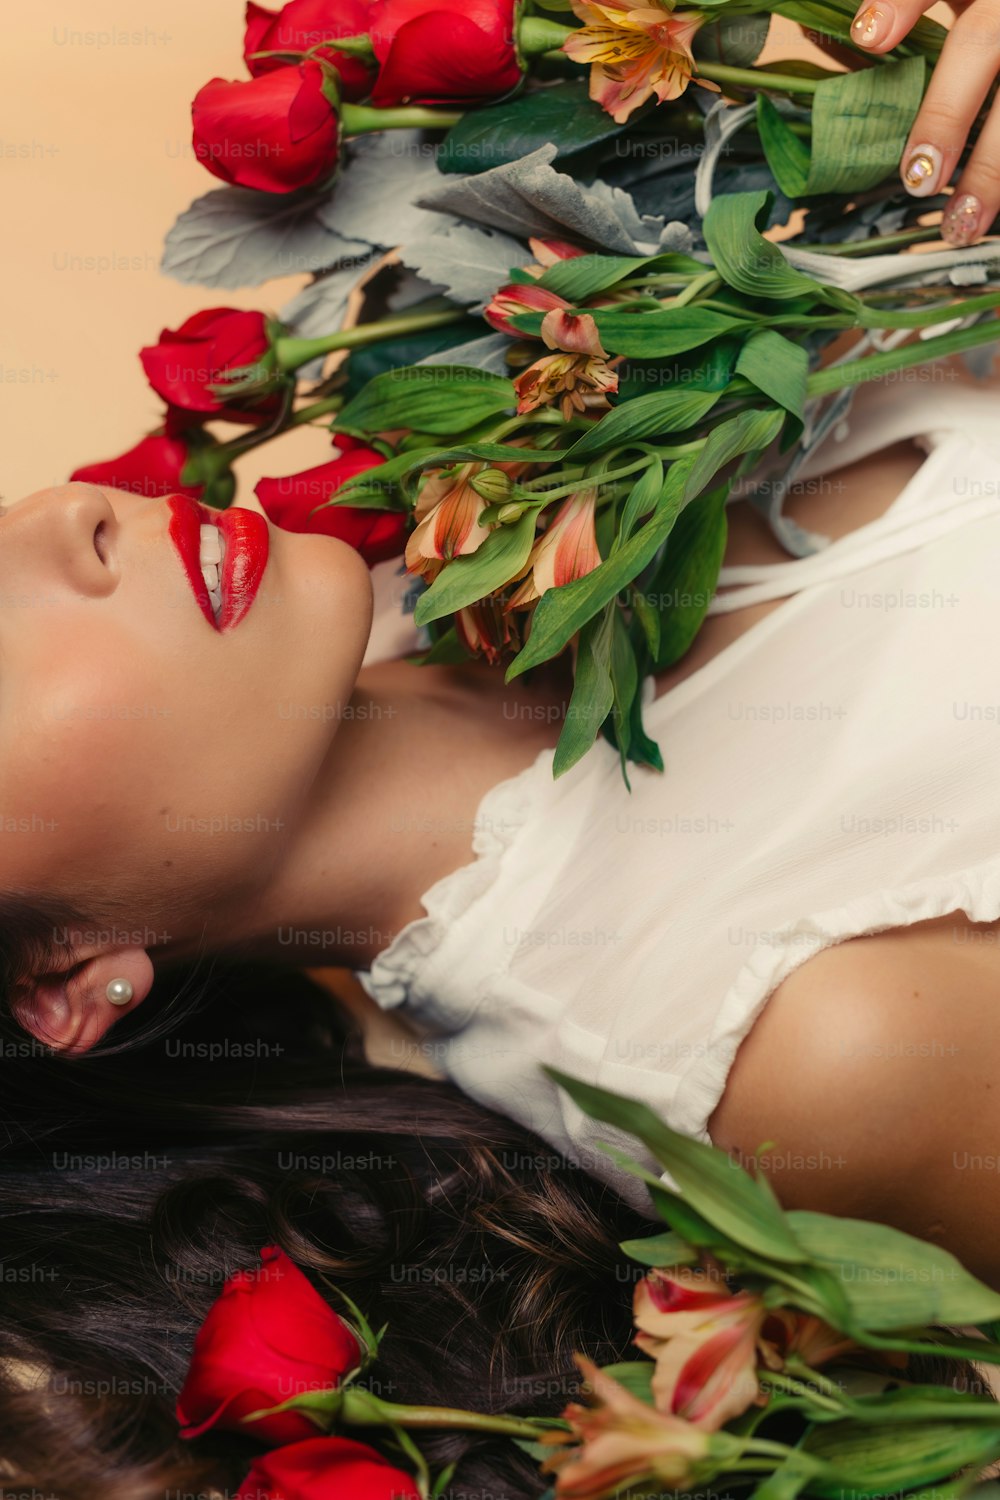 a woman laying on the ground with flowers in her hair